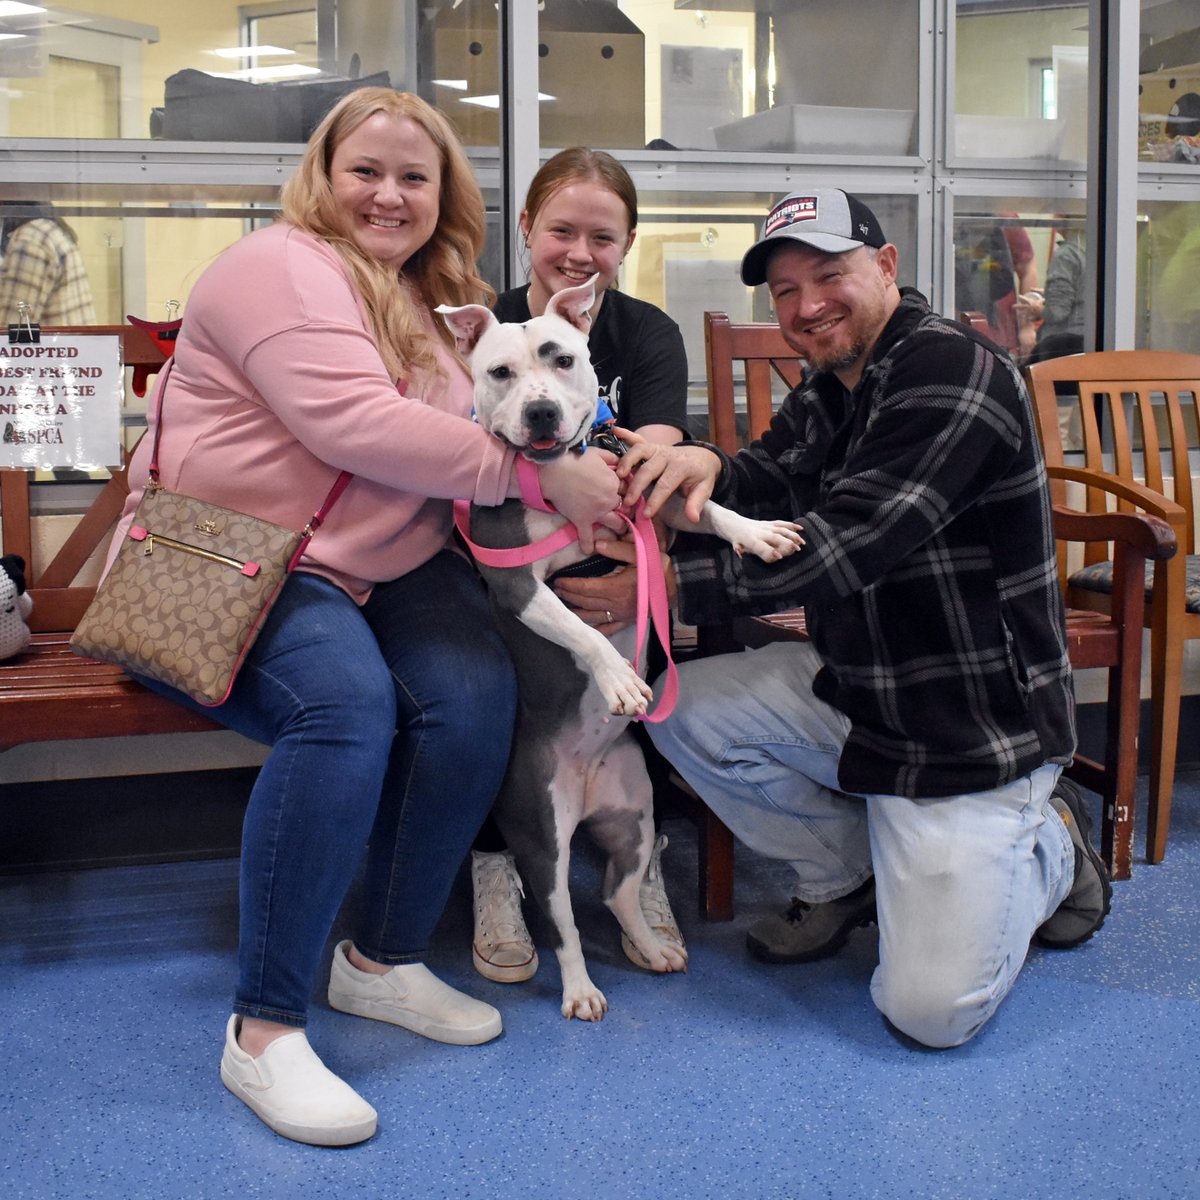 After more than 2 months, our longest-tenured dog, Meg, has finally found her forever home! #FeelGoodFriday #homeatlast